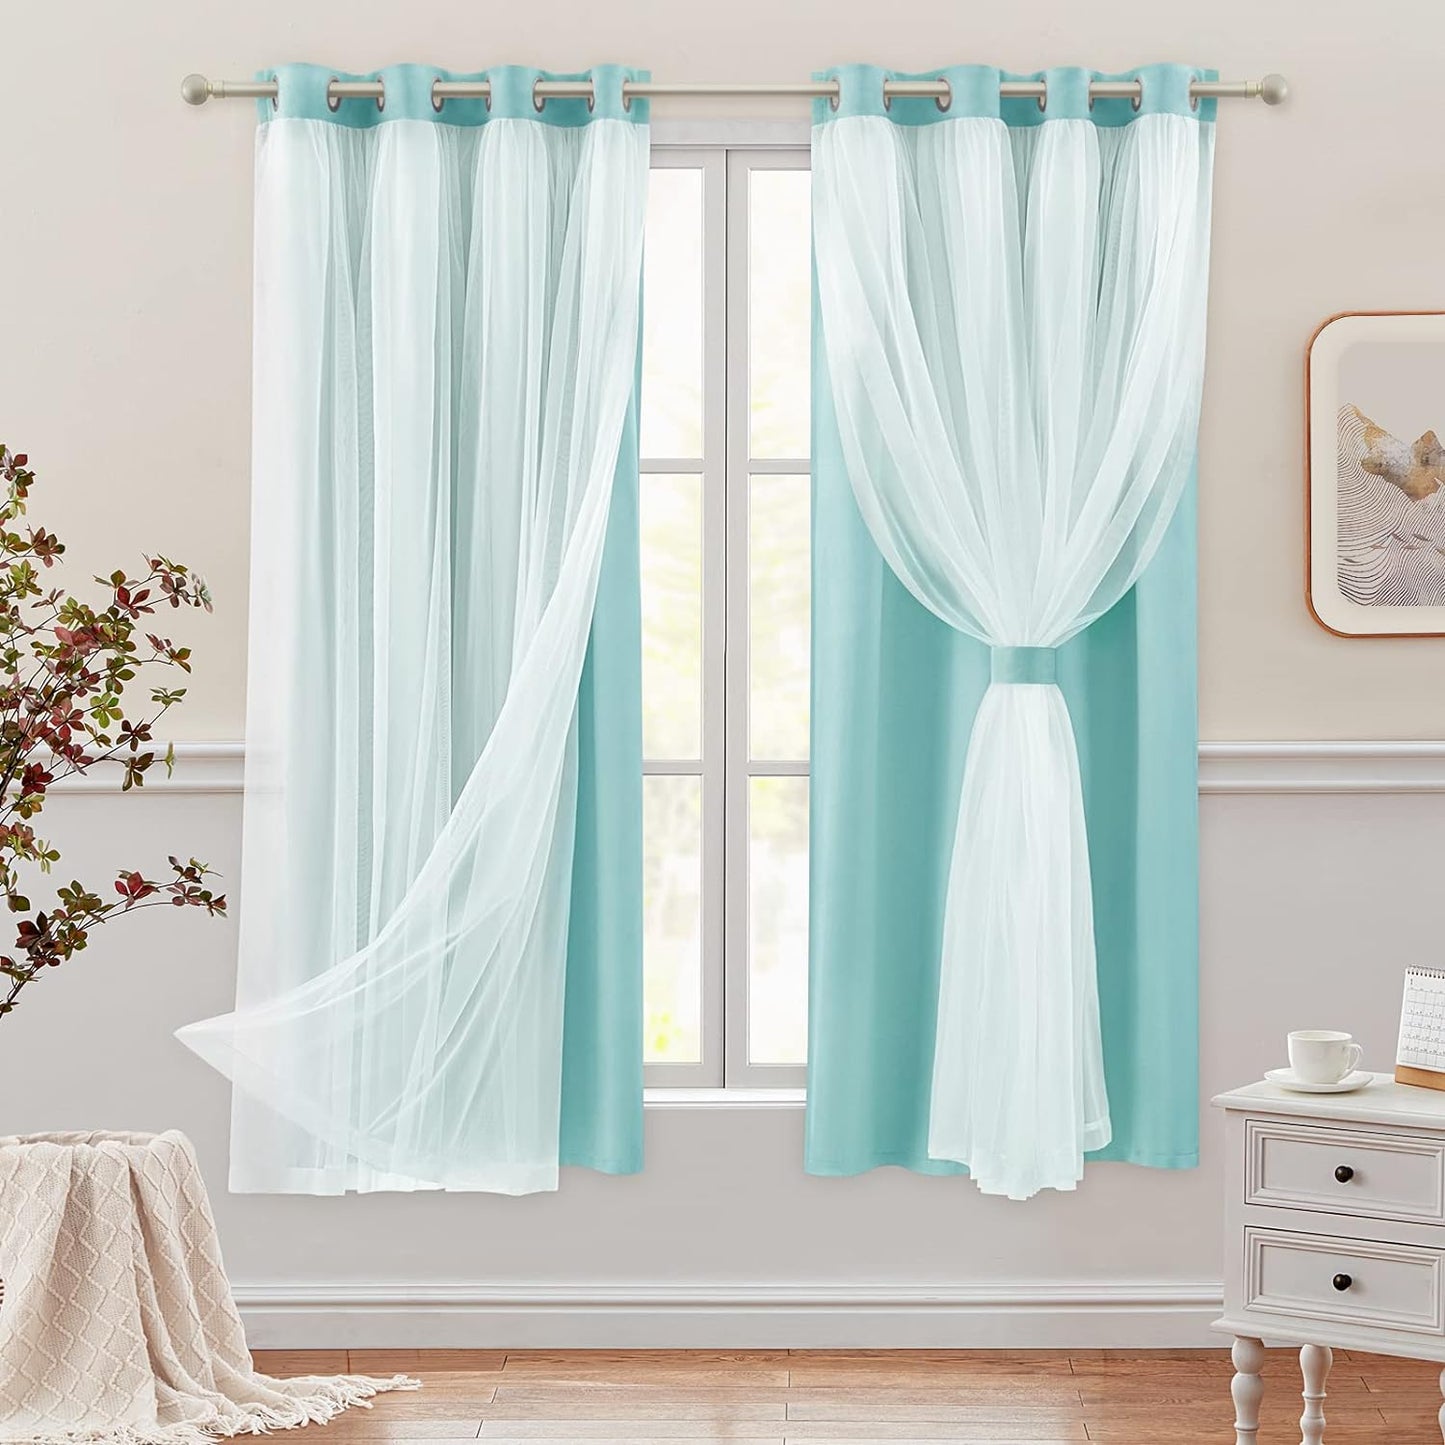 HOMEIDEAS Double Layer Curtains Light Grey Blackout Curtains 84 Inch Length 2 Panels Nursery Curtains for Girls Kids Bedroom Grommet Blackout Curtains with Sheer Overlay  HOMEIDEAS Aqua 52" X 63" 